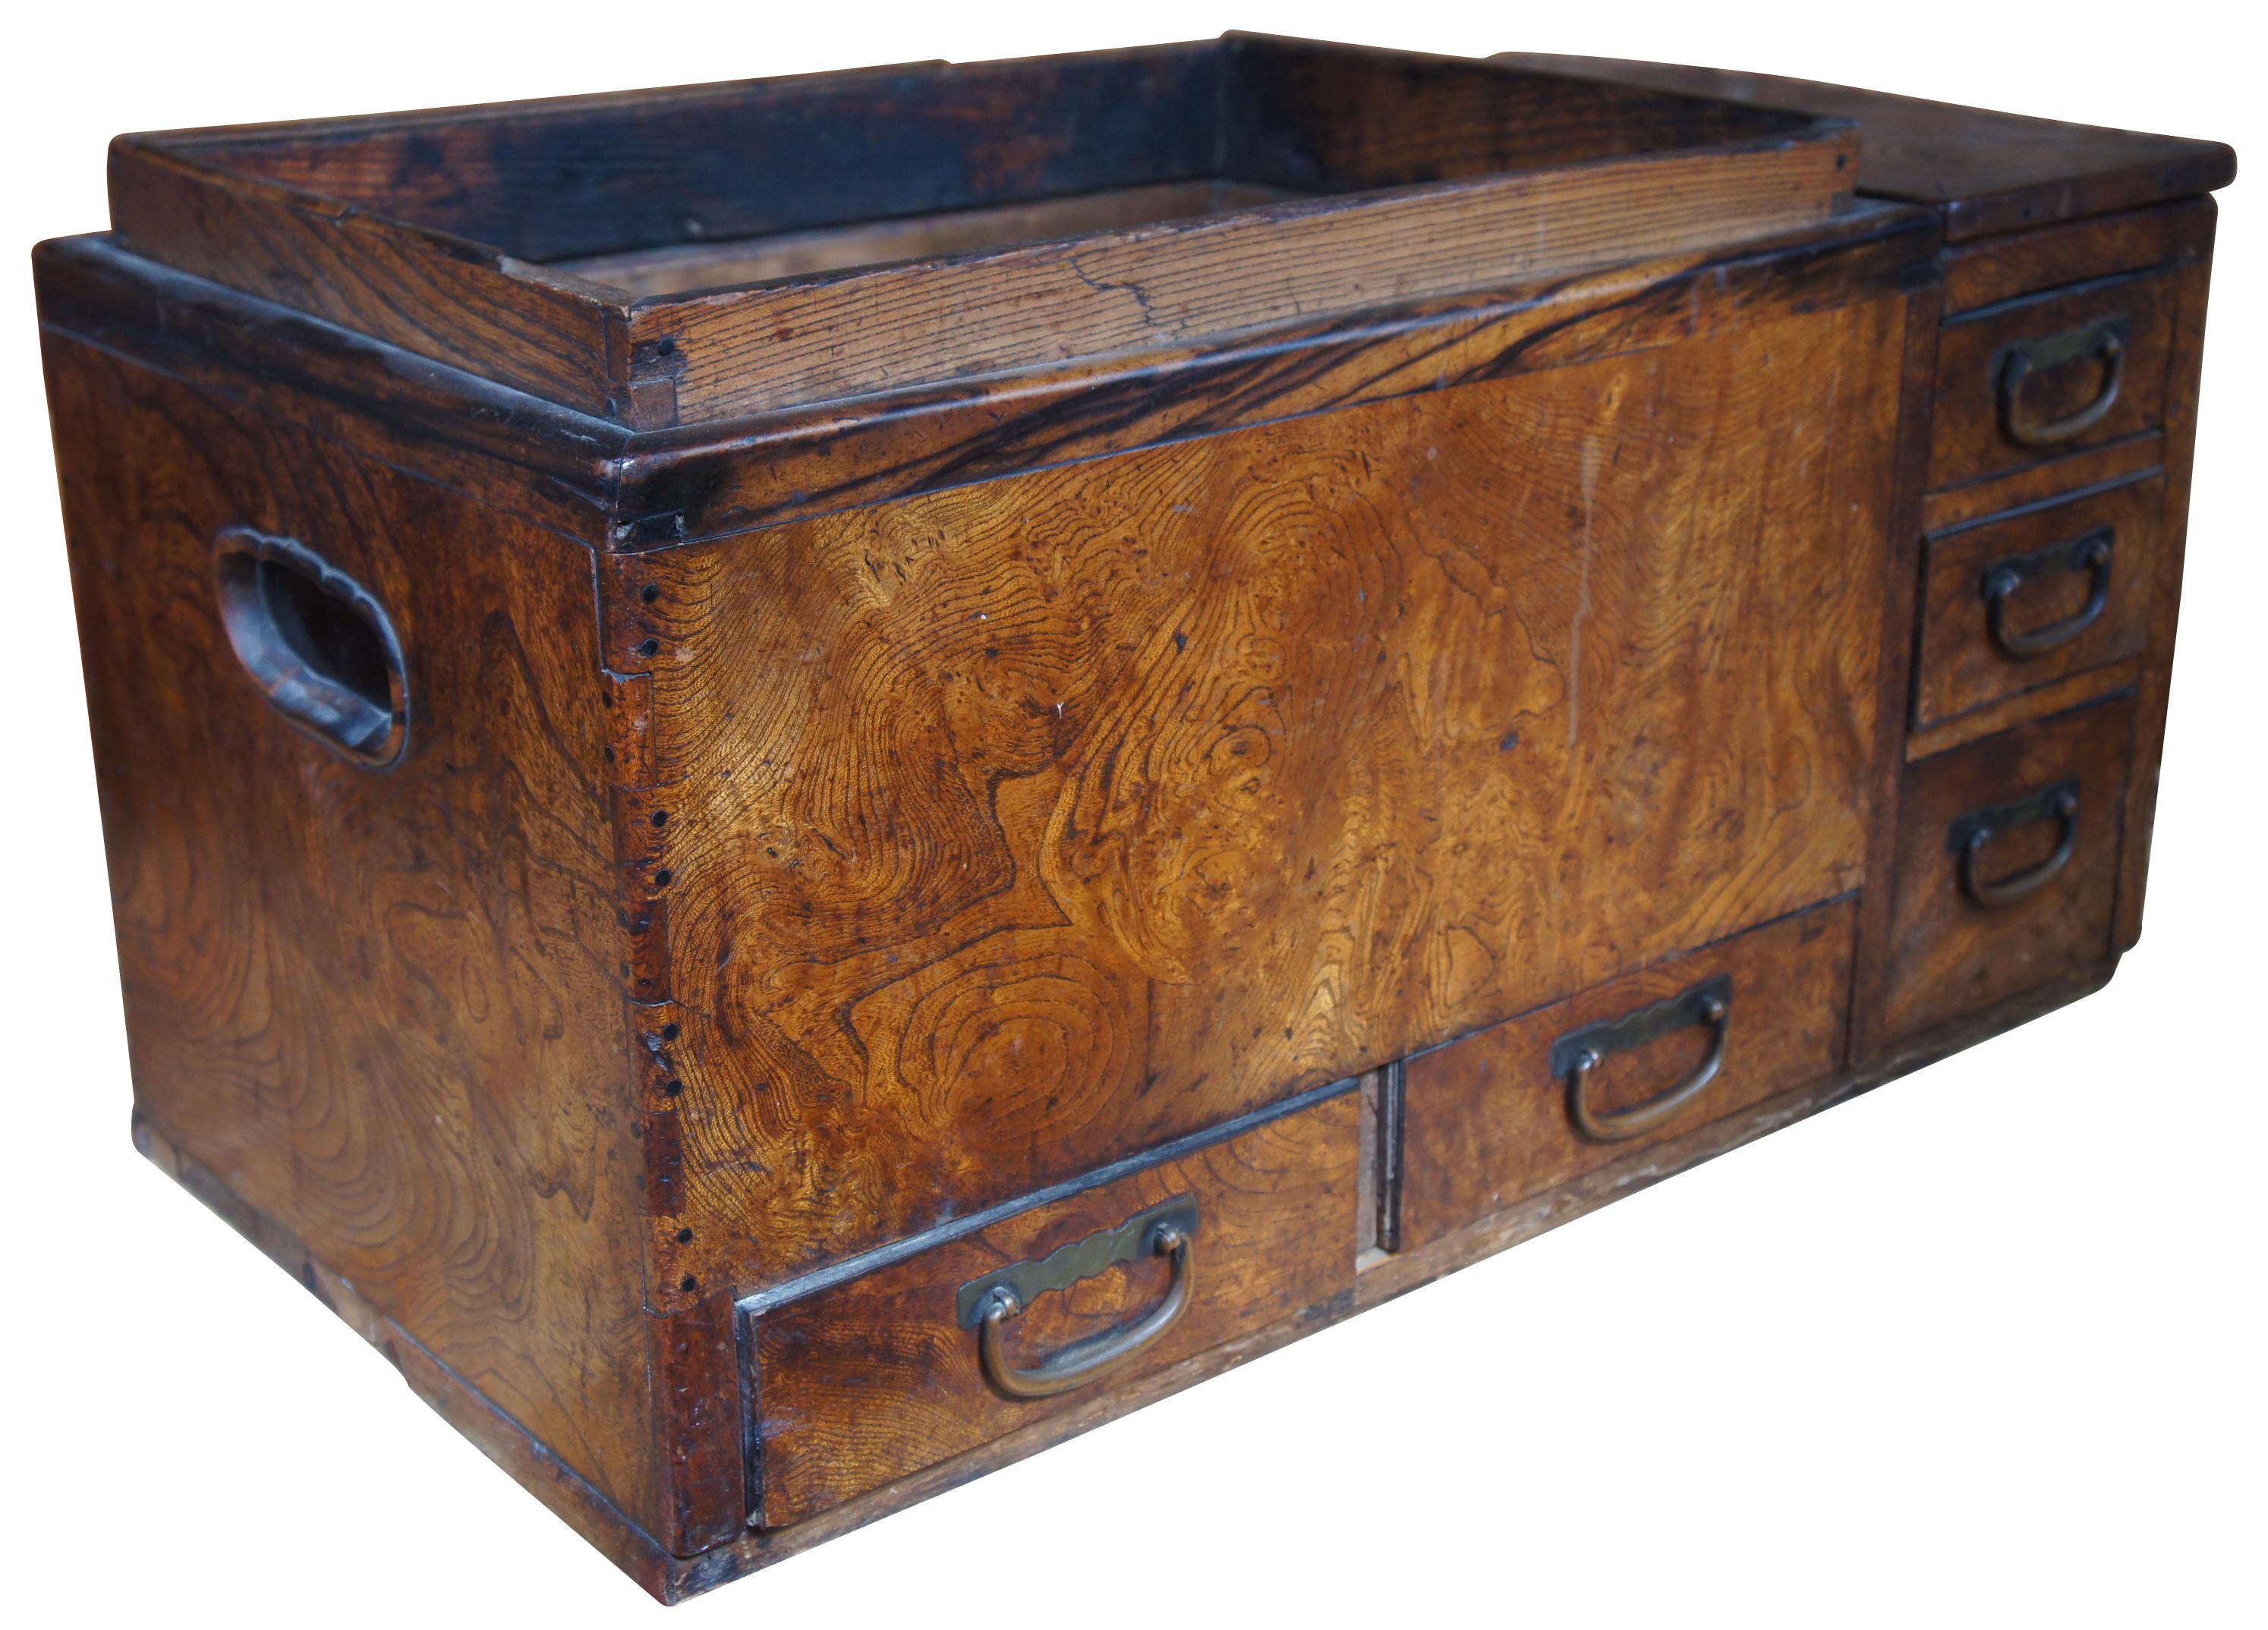 Early 20th century, dovetailed keyaki burl wood case with beautiful grain, copper-lined well, upper removable panel, over five drawers, with copper kettle mount and accessories.

A top could be added for use as a coffee or side table.